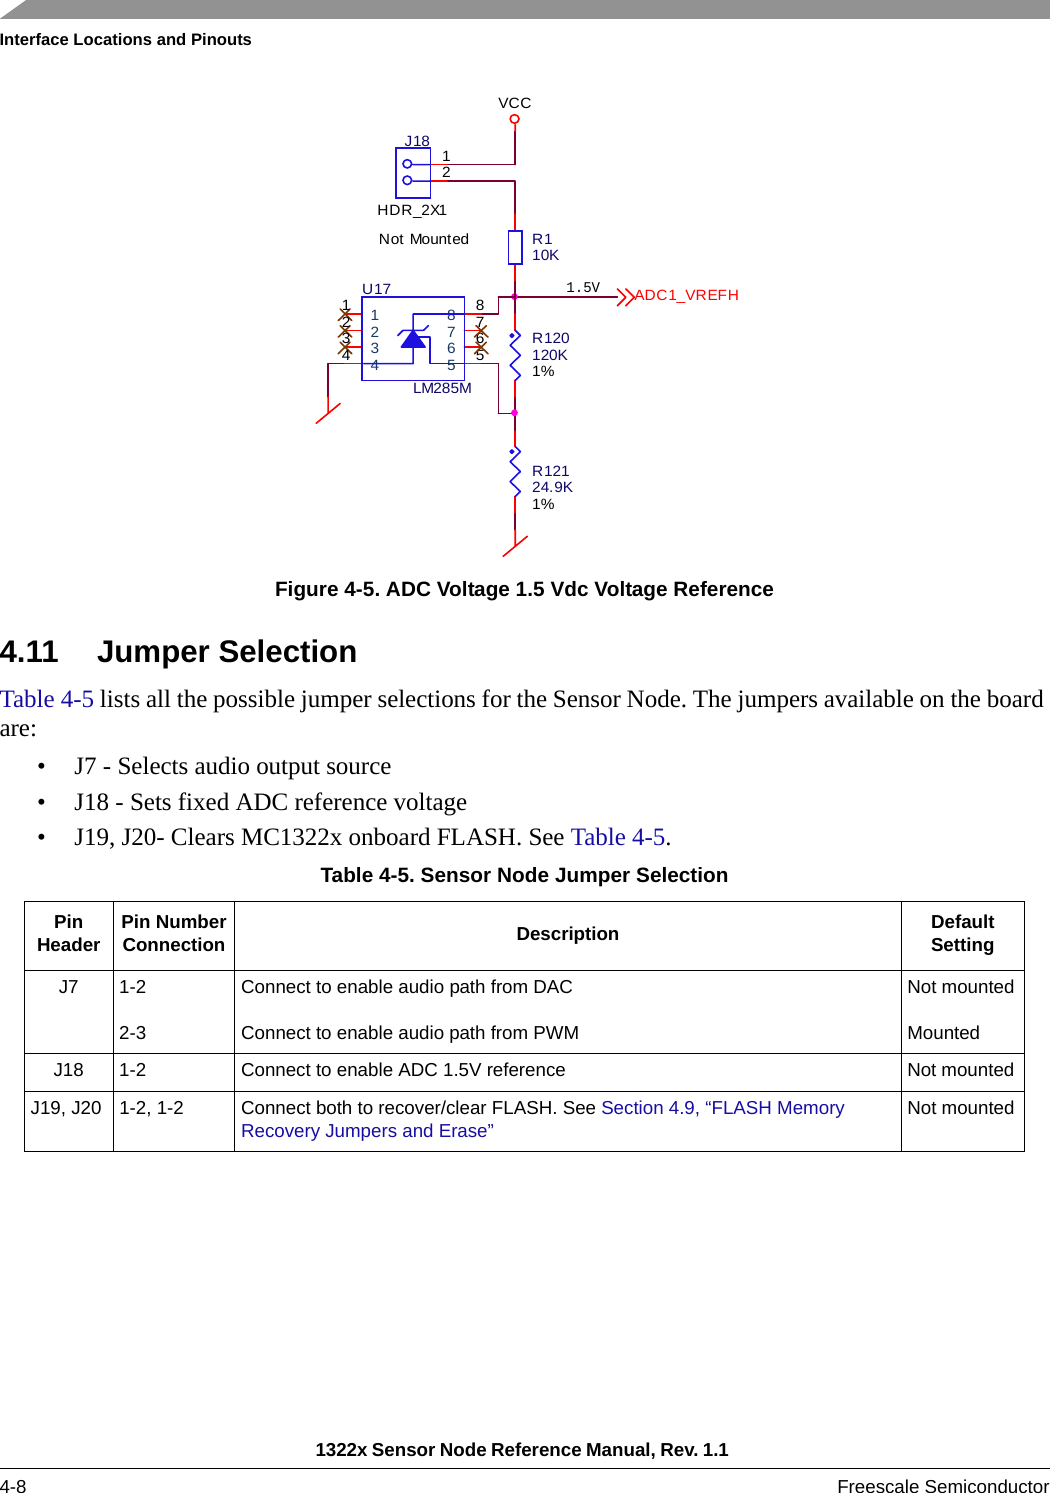 Interface Locations and Pinouts1322x Sensor Node Reference Manual, Rev. 1.1 4-8 Freescale SemiconductorFigure 4-5. ADC Voltage 1.5 Vdc Voltage Reference4.11 Jumper SelectionTable 4-5 lists all the possible jumper selections for the Sensor Node. The jumpers available on the board are:• J7 - Selects audio output source• J18 - Sets fixed ADC reference voltage• J19, J20- Clears MC1322x onboard FLASH. See Table 4-5.Table 4-5. Sensor Node Jumper SelectionPin Header Pin NumberConnection Description Default SettingJ7 1-22-3Connect to enable audio path from DACConnect to enable audio path from PWMNot mountedMountedJ18 1-2  Connect to enable ADC 1.5V reference Not mountedJ19, J20 1-2, 1-2 Connect both to recover/clear FLASH. See Section 4.9, “FLASH Memory Recovery Jumpers and Erase” Not mounted 1.5VR110K1122334455667788U17LM285MR12124.9K1%R120120K1%12J18HDR_2X1Not MountedVCCADC1_VREFH